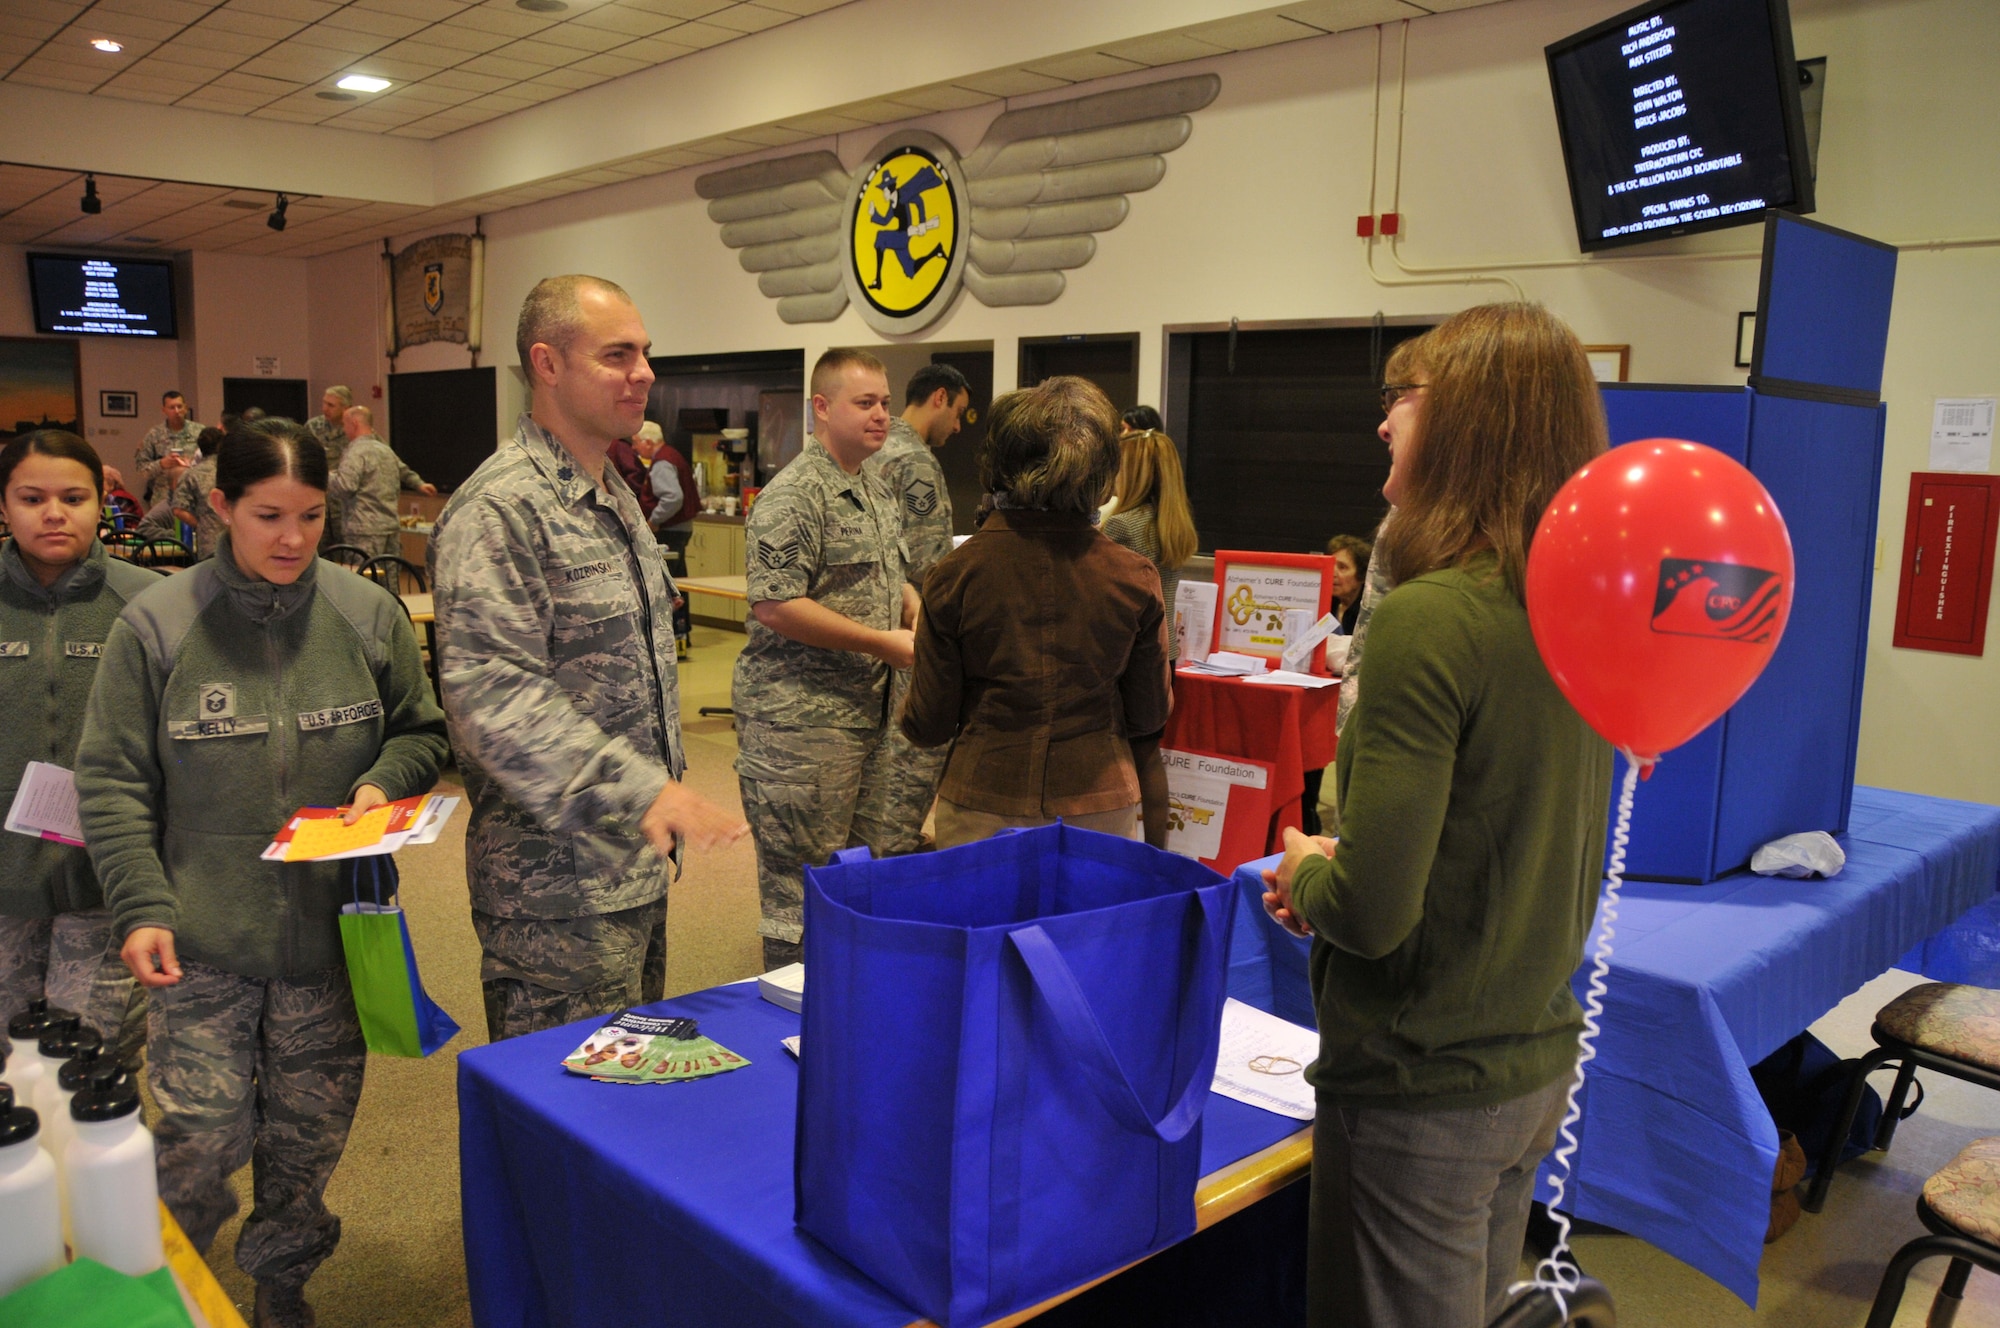 Members of the Connecticut Air National Guard check out the displays and information booths for charities during the annual Combined Federal Campaign kick-off event hosted by the 103rd Airlift Wing at Bradley Air National Guard Base, East Granby, Conn., Nov. 14, 2012. (U.S. Air Force photo by Senior Airman Emmanuel Santiago)